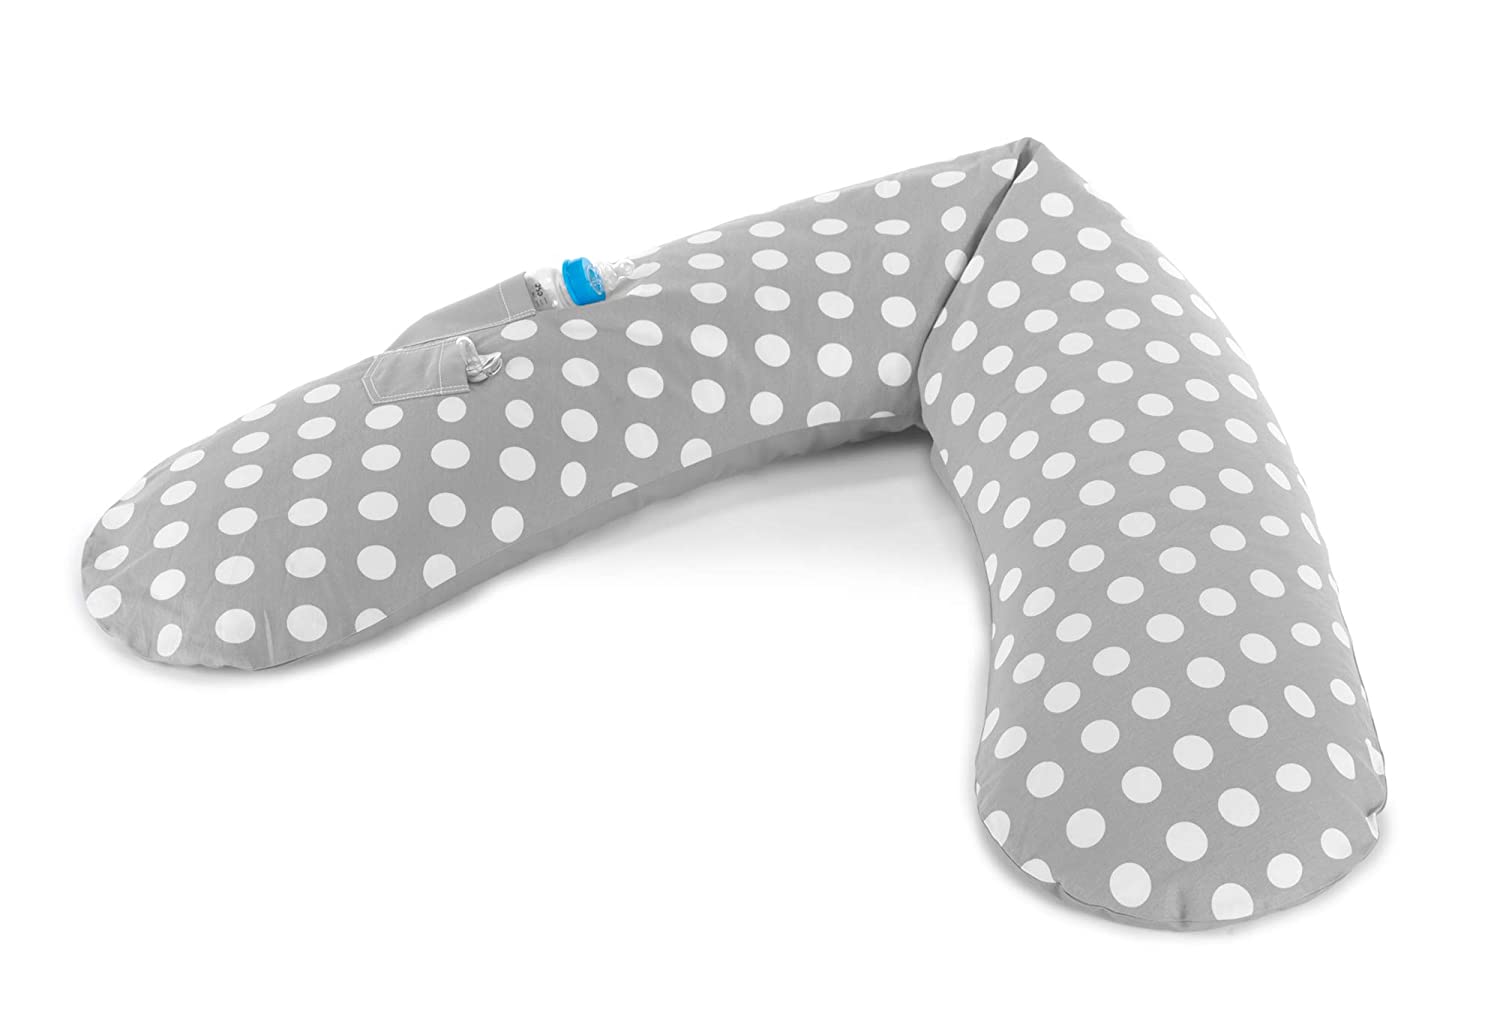 Replacement Cover For The Original Theraline Pregnancy And Nursing Pillow, 100% Cotton. Pocket attachment.